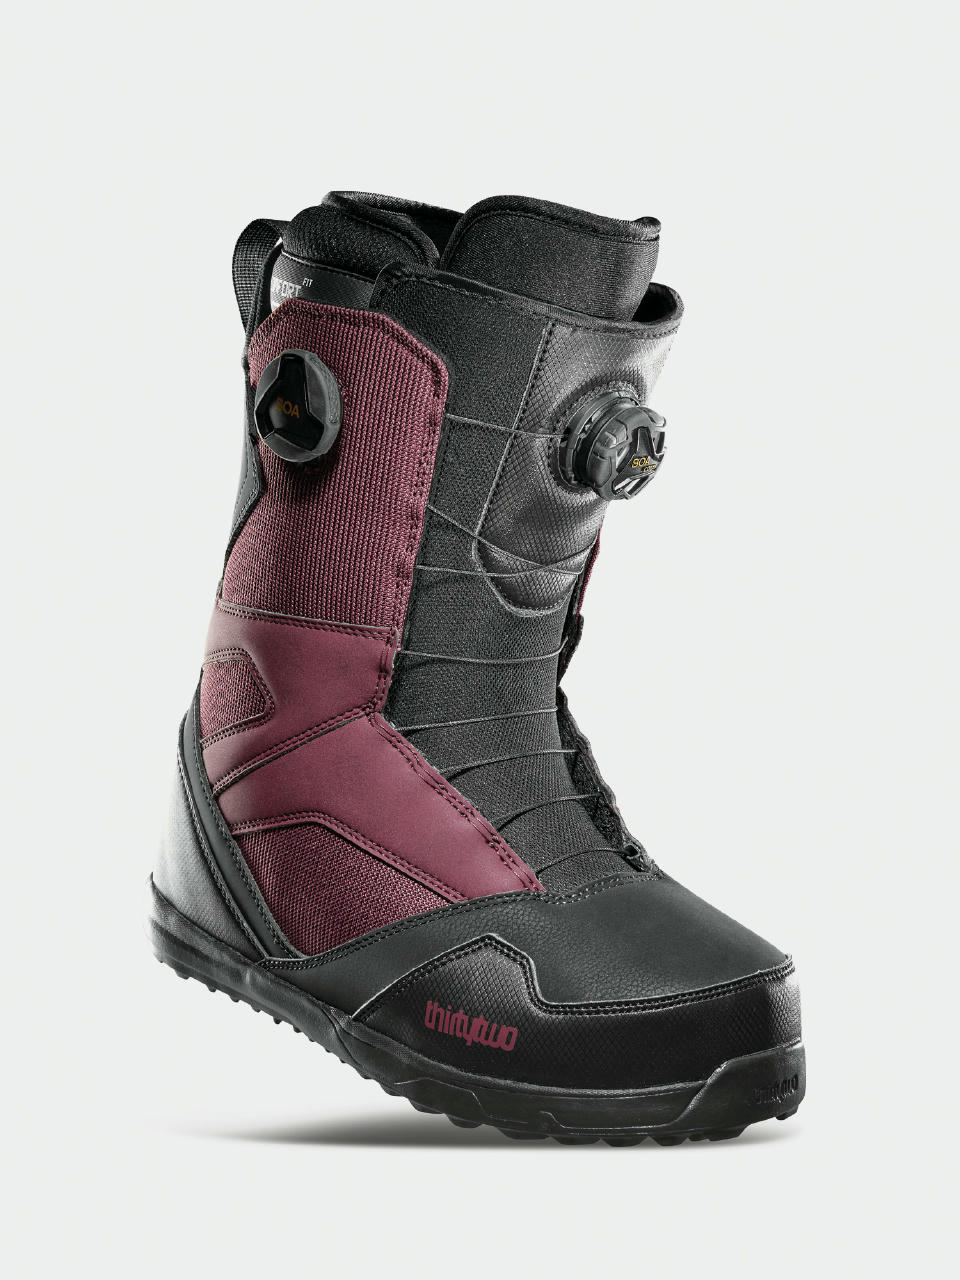 thirtytwo thirtytwo Womens Lashed B4BC Double Boa 18 Snowboard Boots